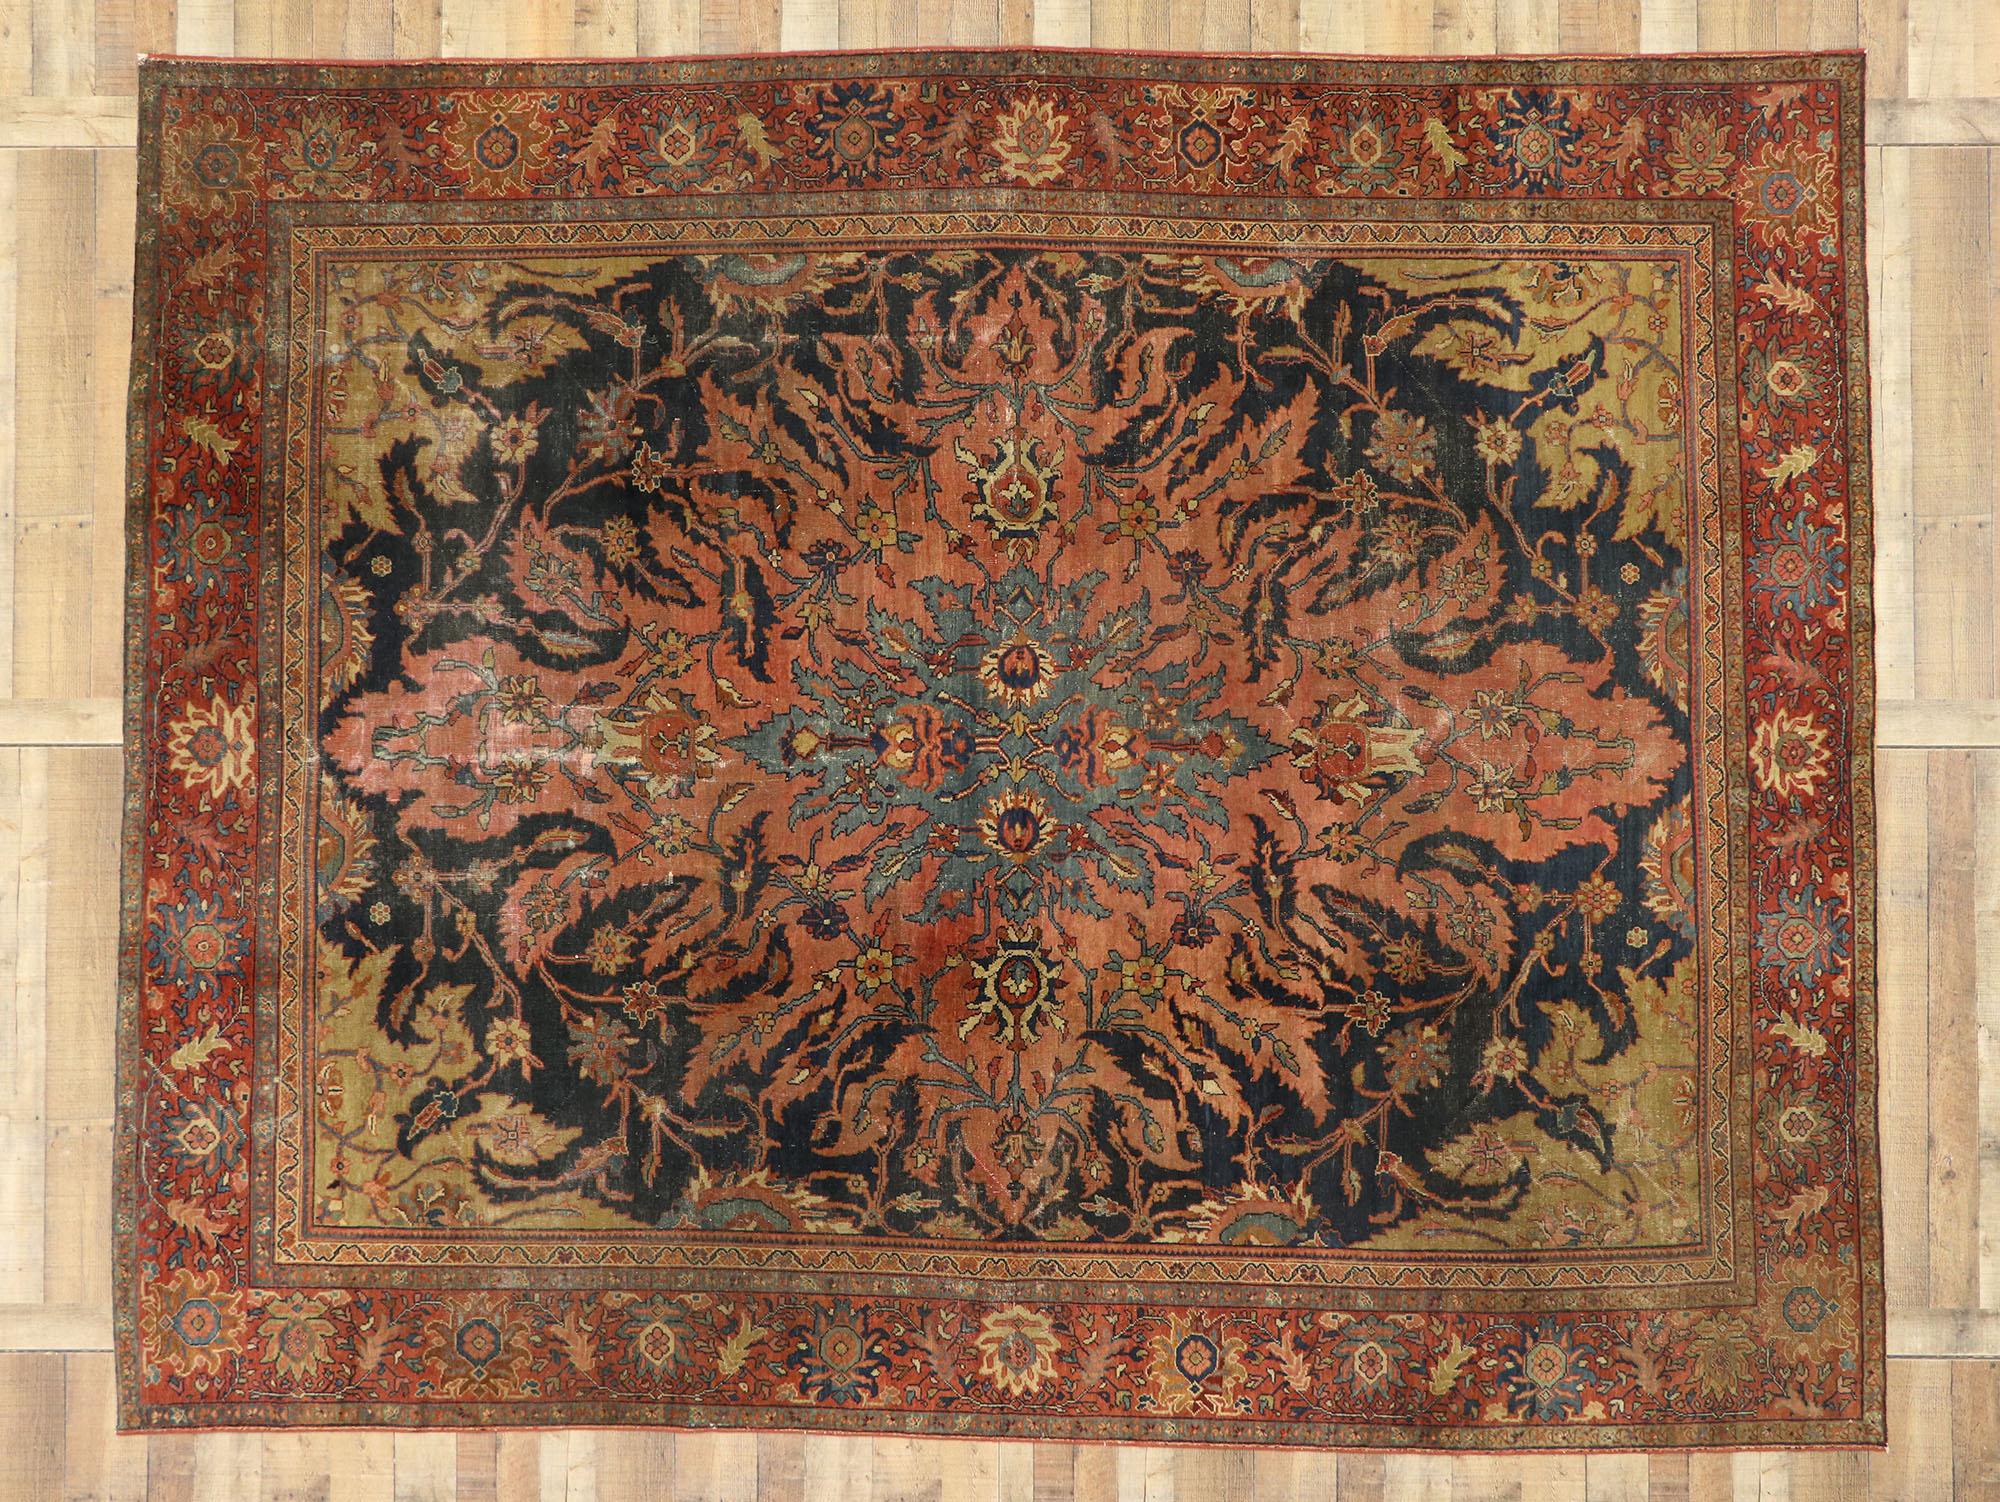 19th Century Distressed Antique Persian Farahan Rug with Modern Rustic English Style For Sale